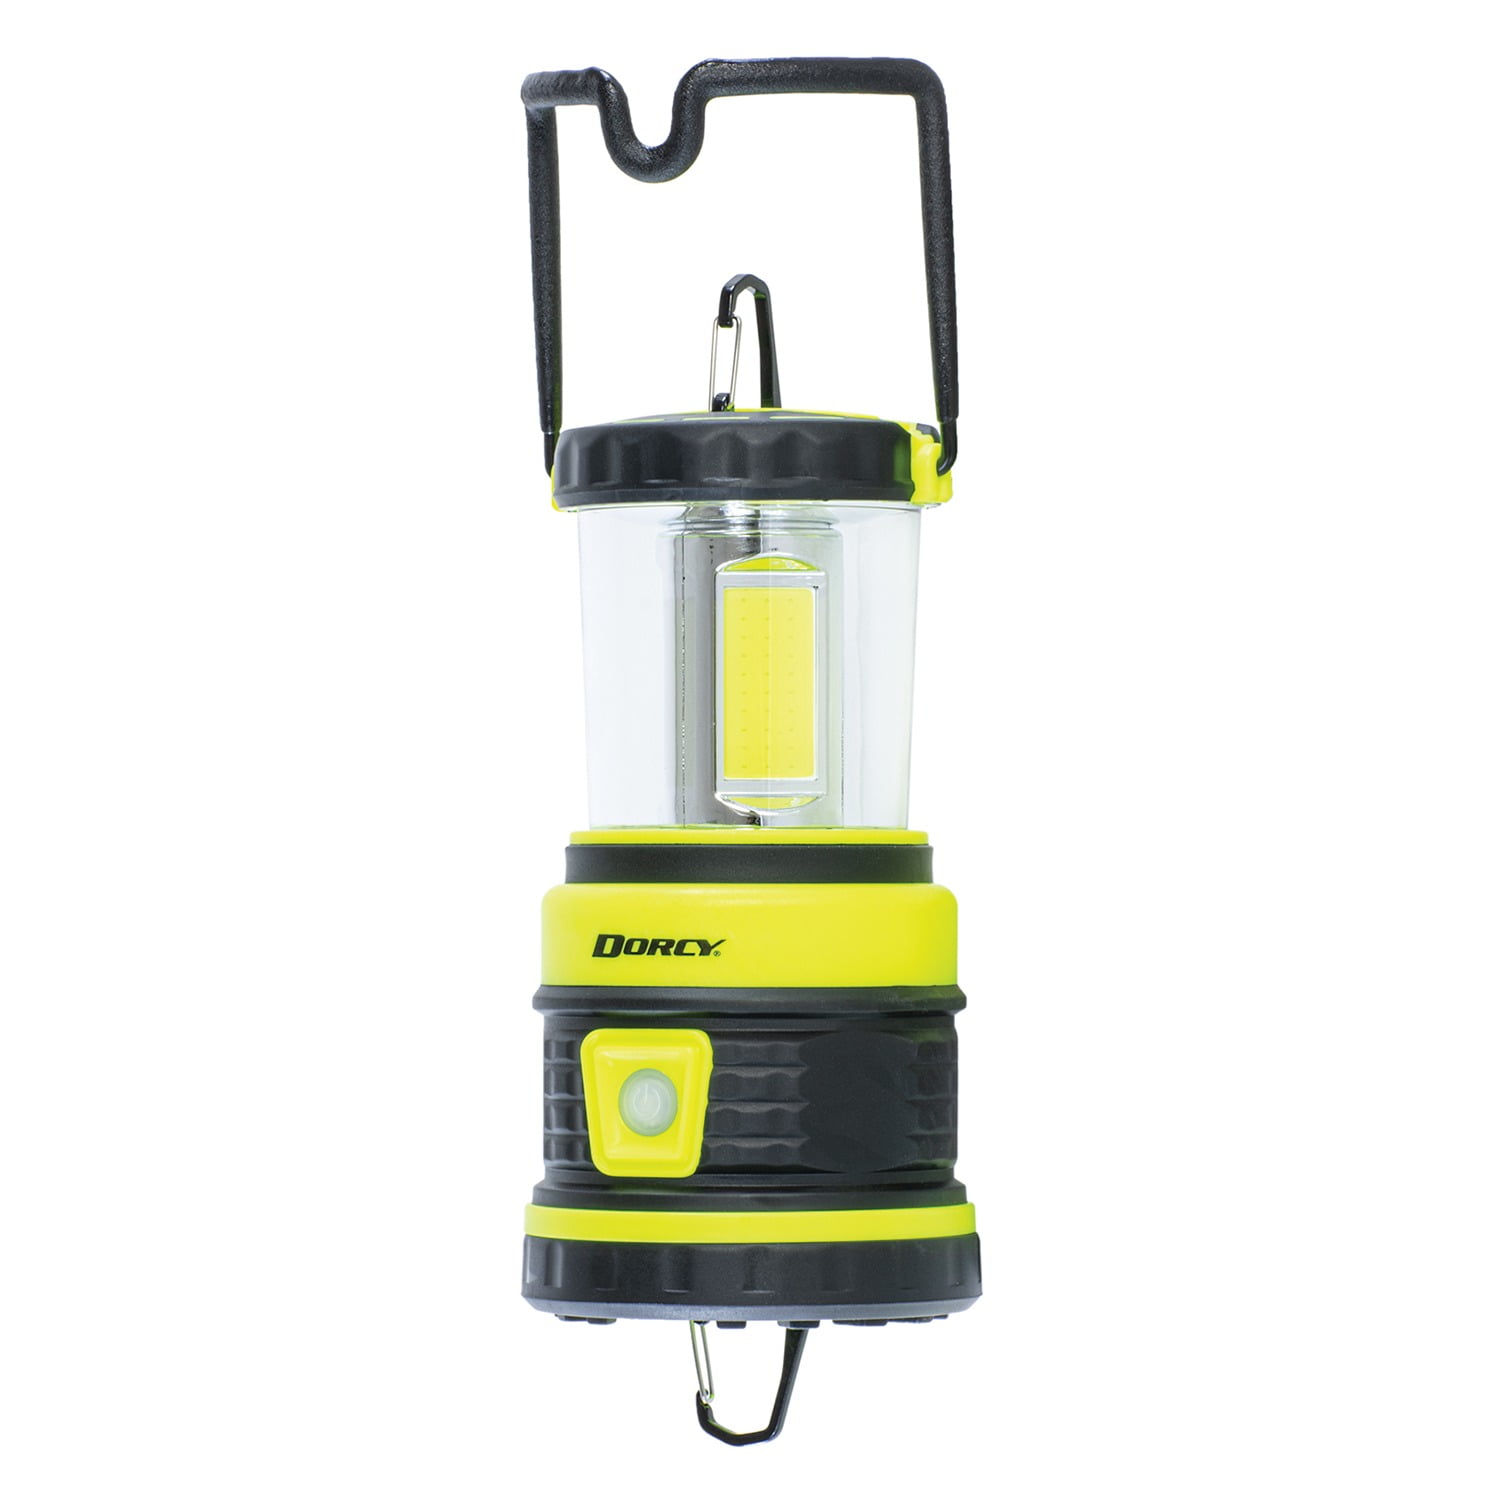 Portable Work Light USB Rechargeable LED Camping Lights 1800 Lumens 4 Modes NEW 